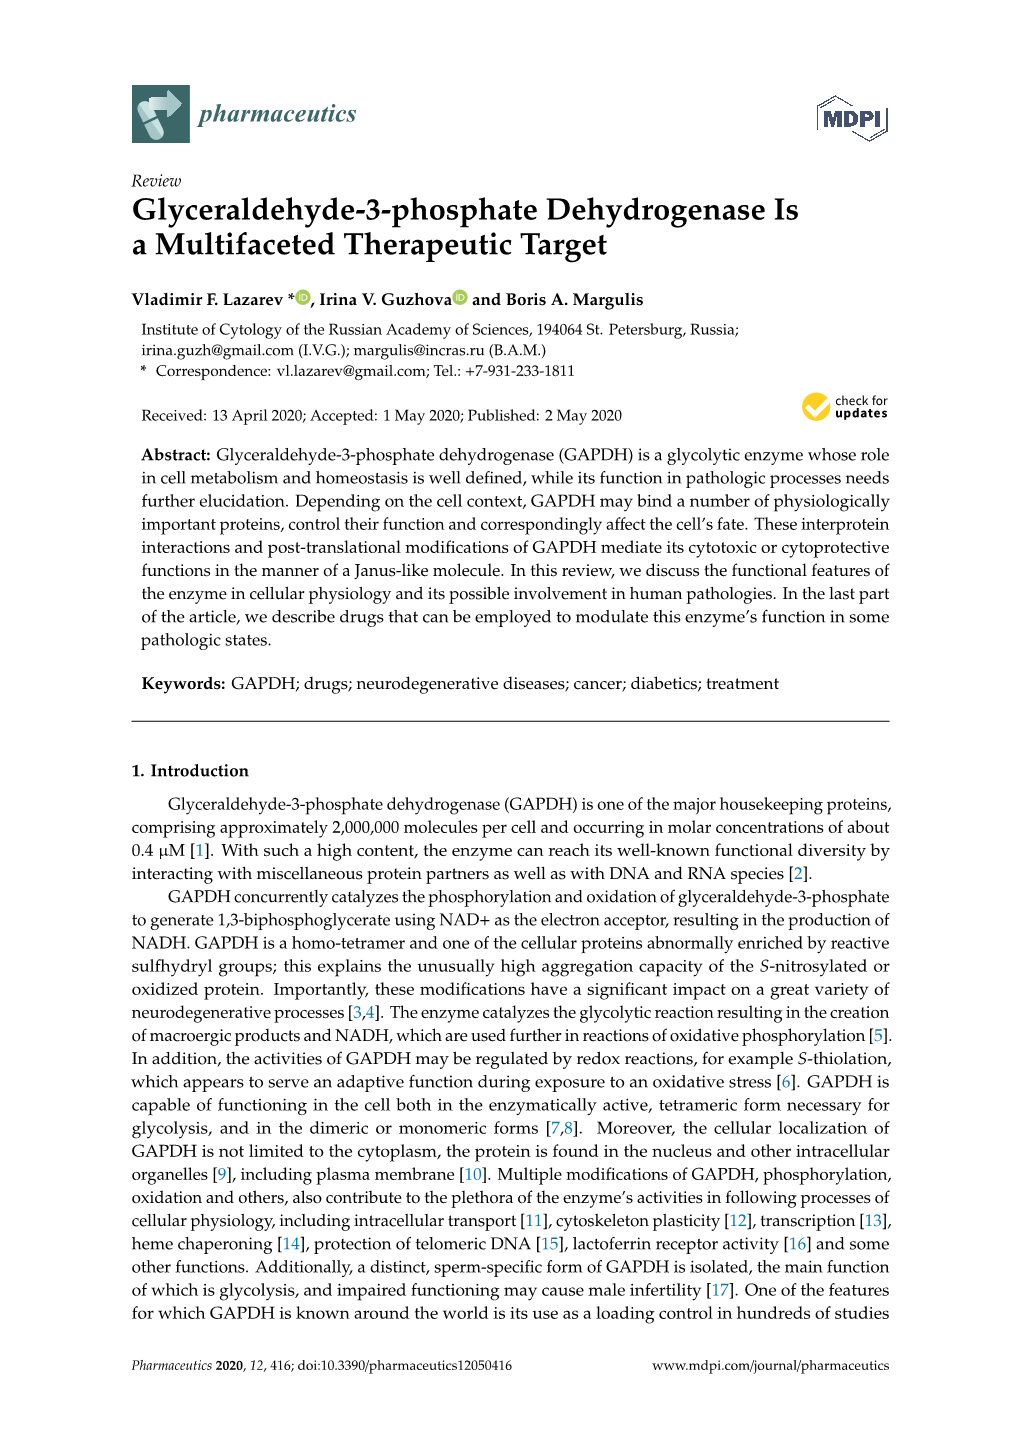 Glyceraldehyde-3-Phosphate Dehydrogenase Is a Multifaceted Therapeutic Target